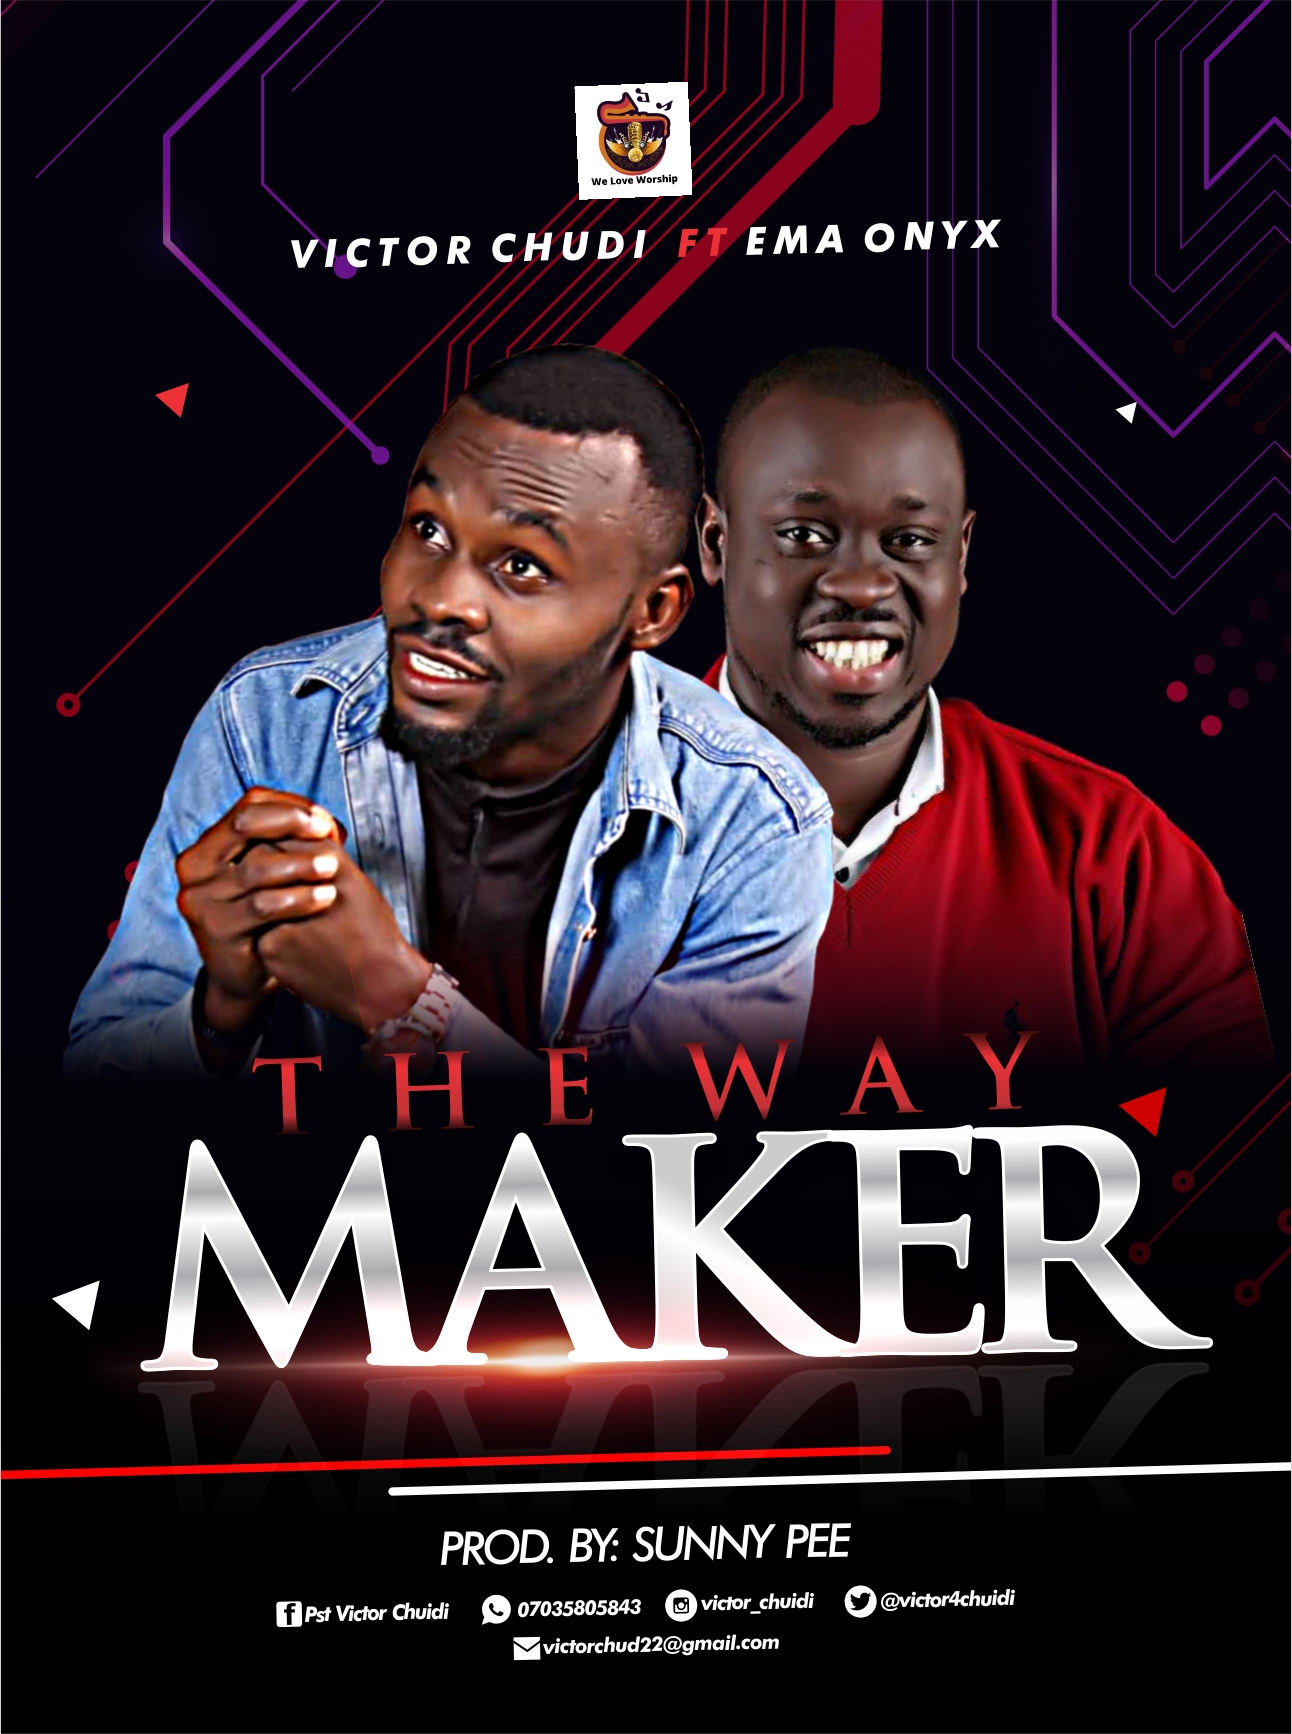 Download THE WAY MAKER by Victor Chudi (MP3 SONG) 19